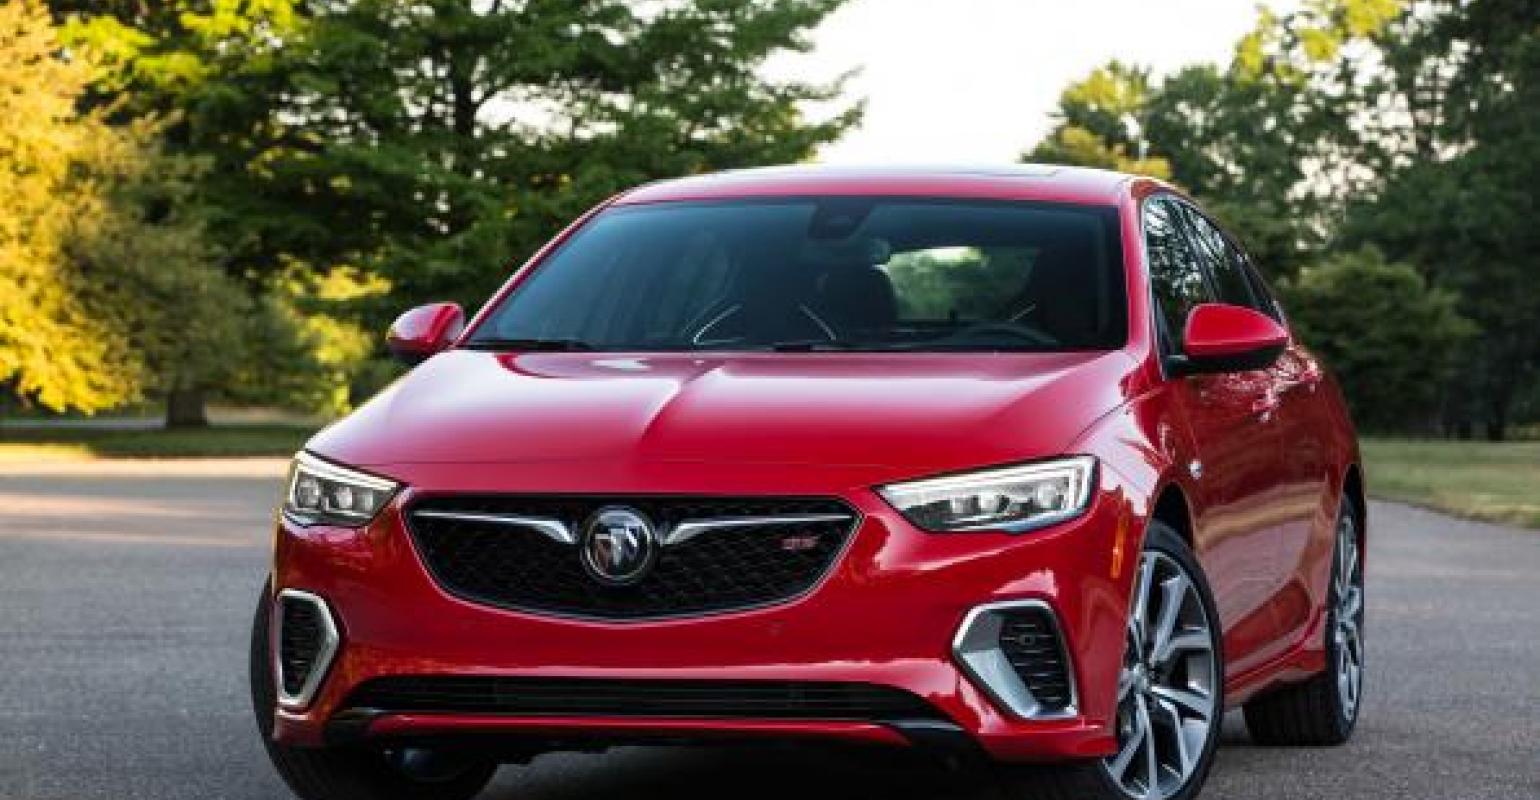 2023 Buick Regal Price, Features, And For Sale